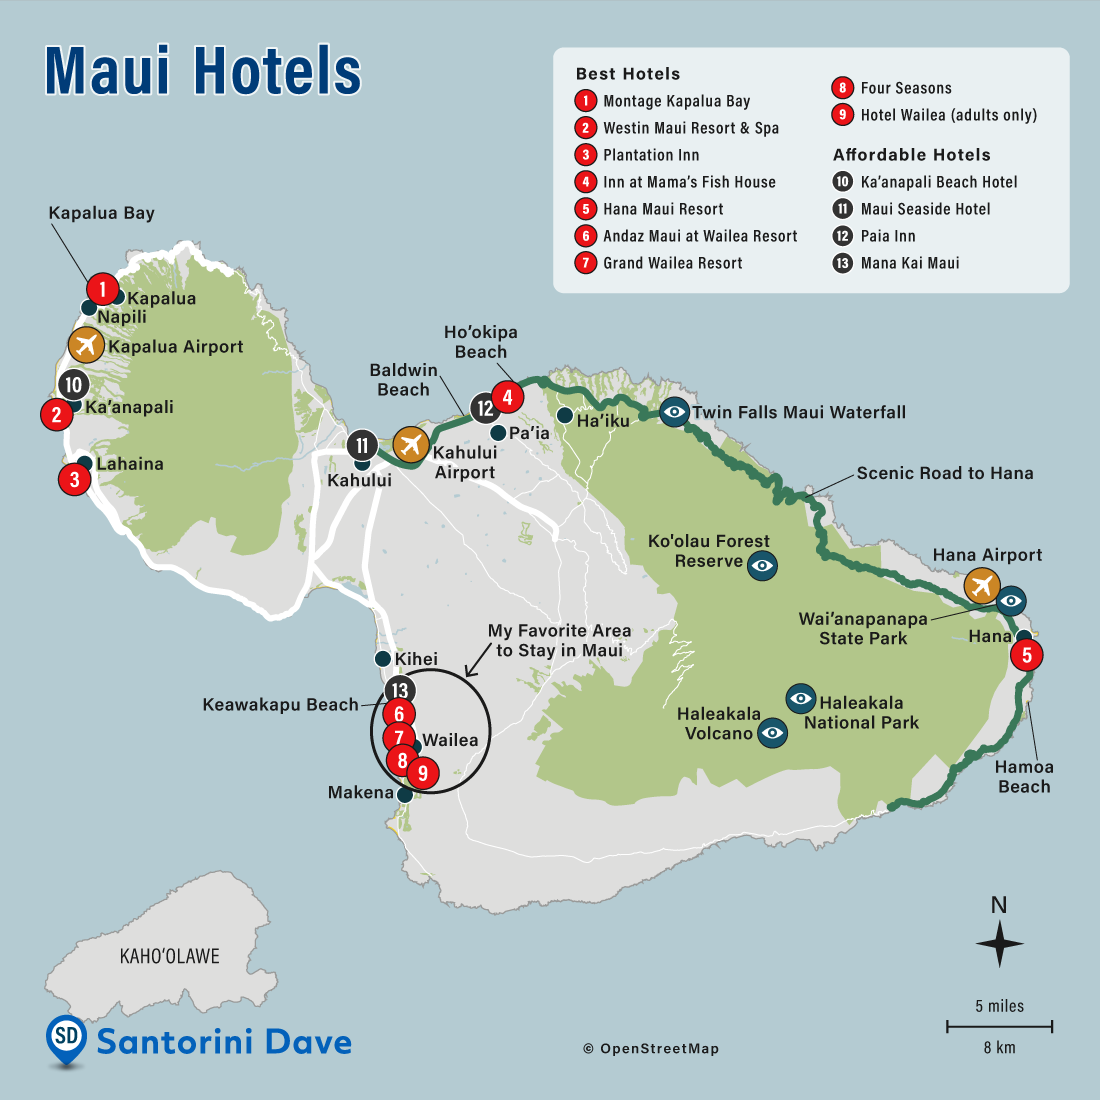 Map of Maui Hotels, Towns, and Beaches.